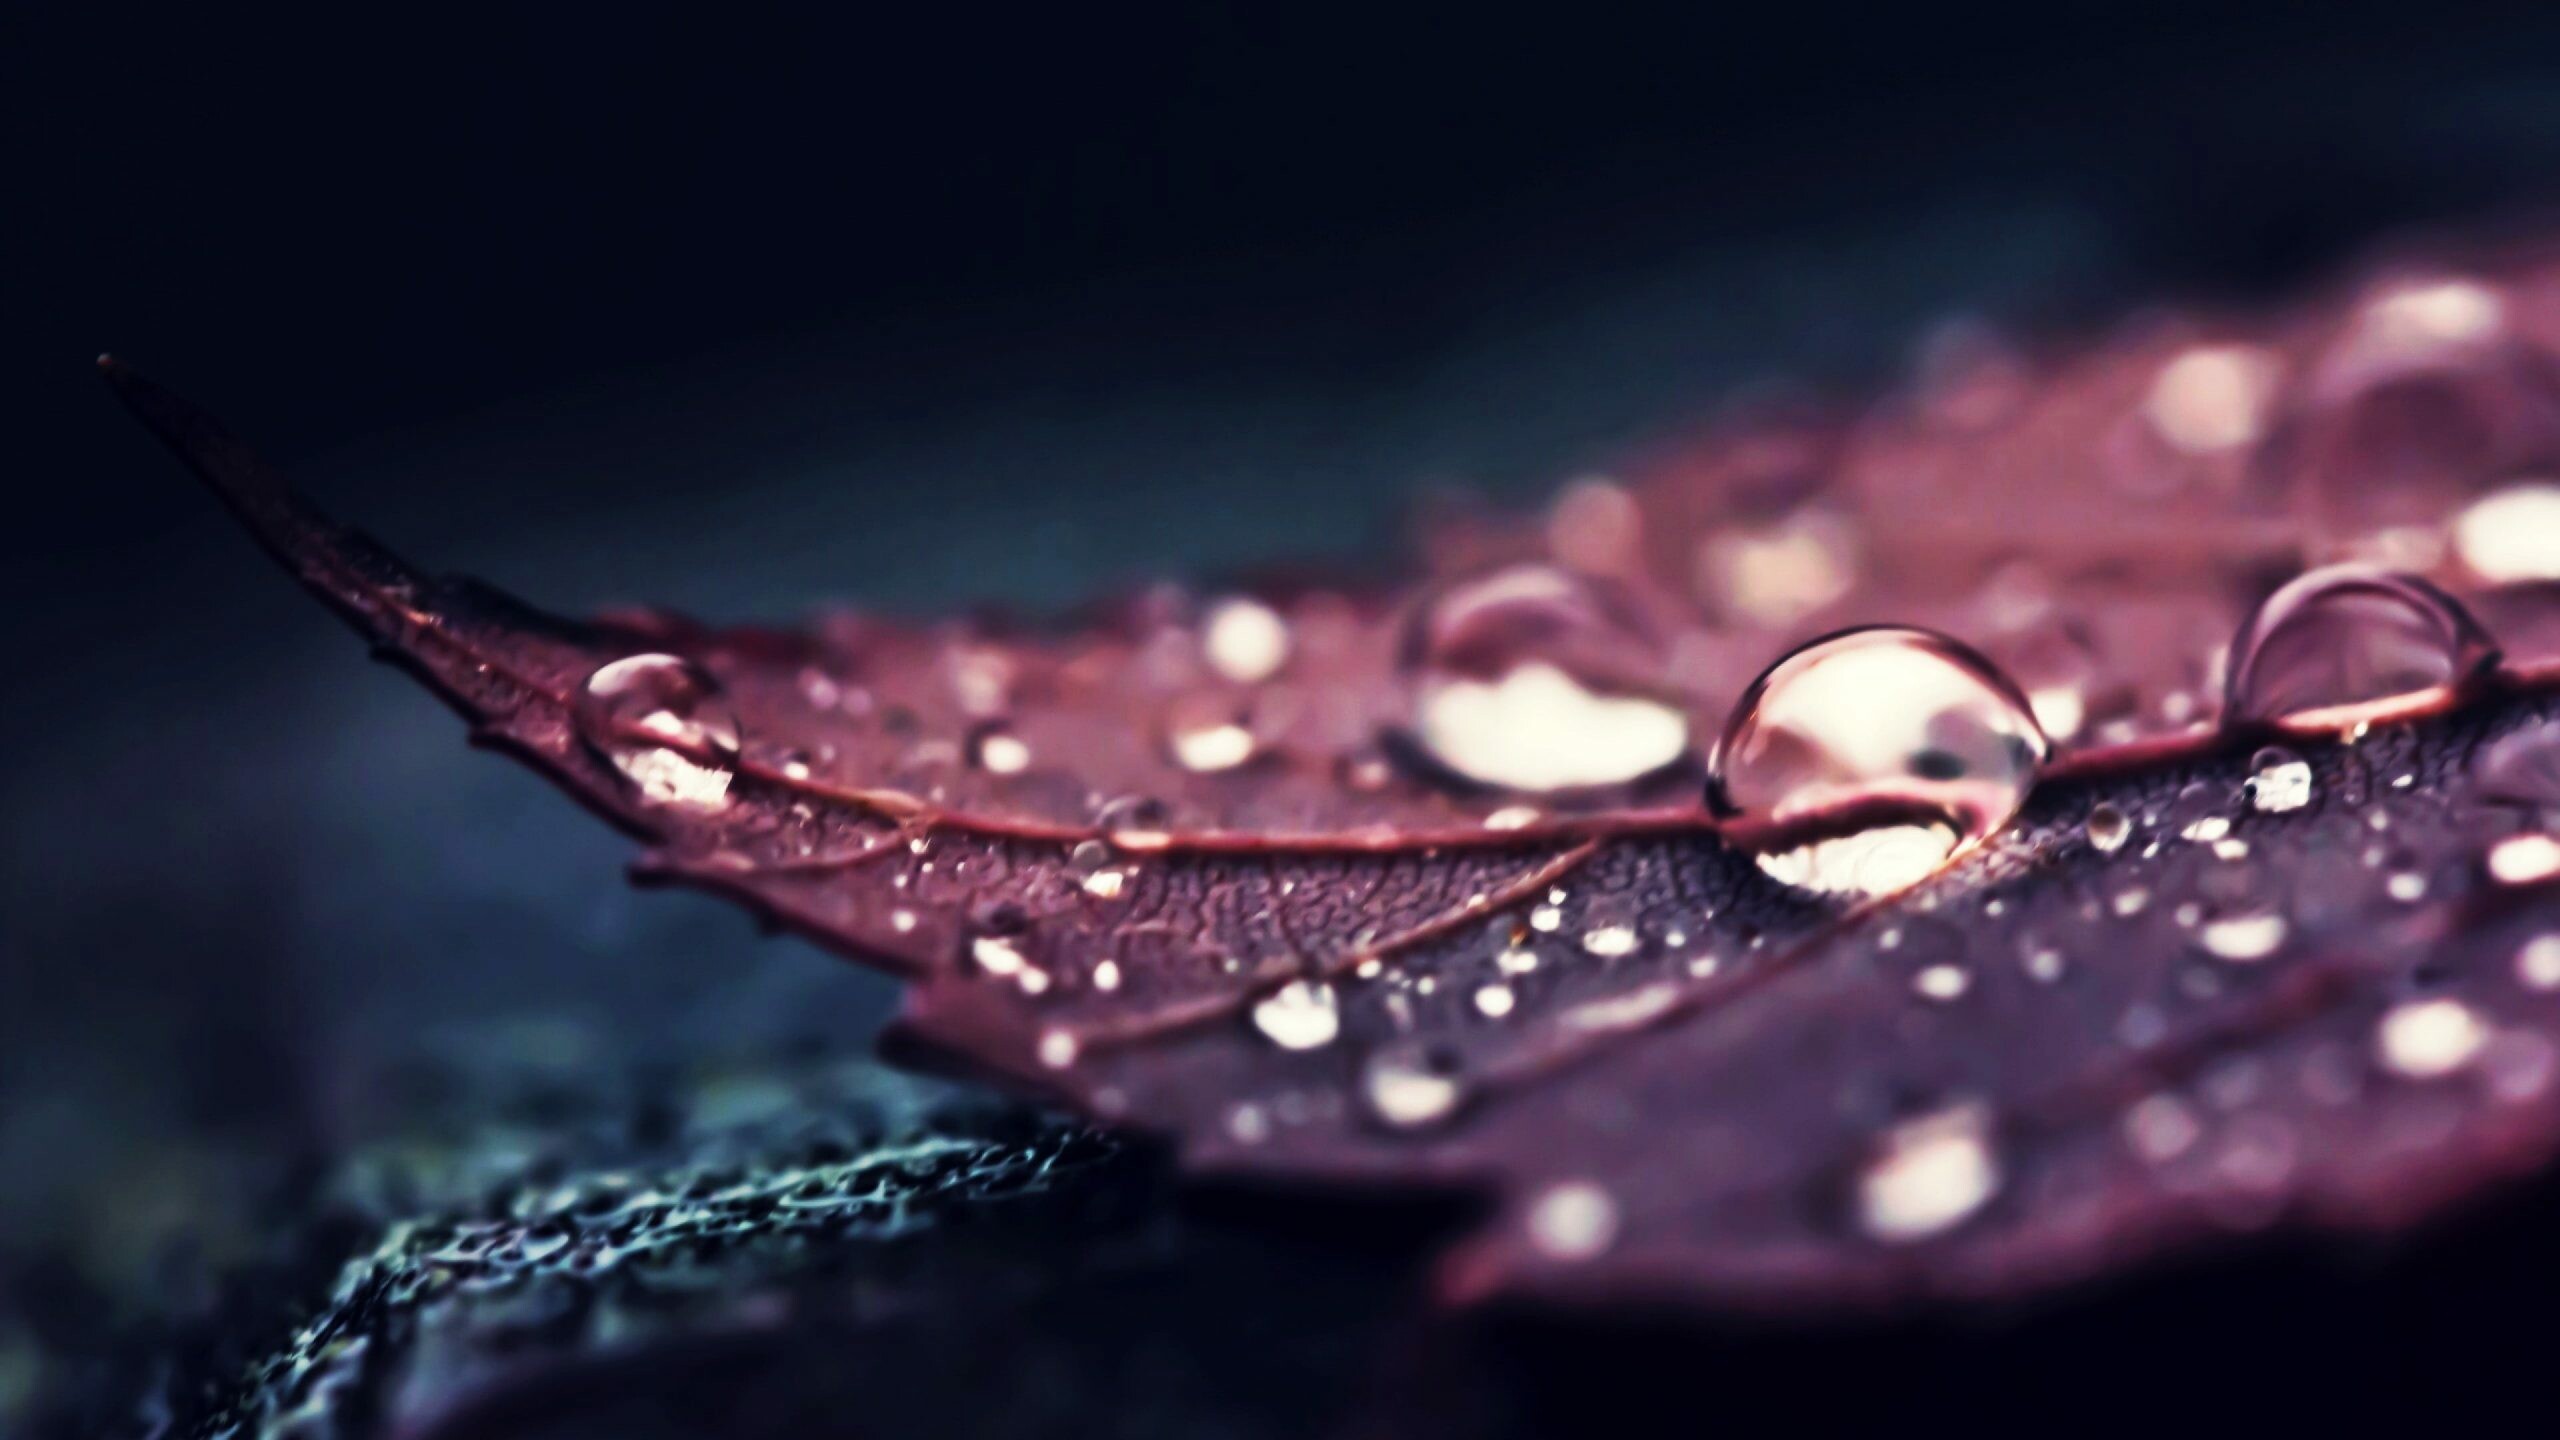 Leaves: Water droplets on a leaf, Drops of moisture. 2560x1440 HD Wallpaper.